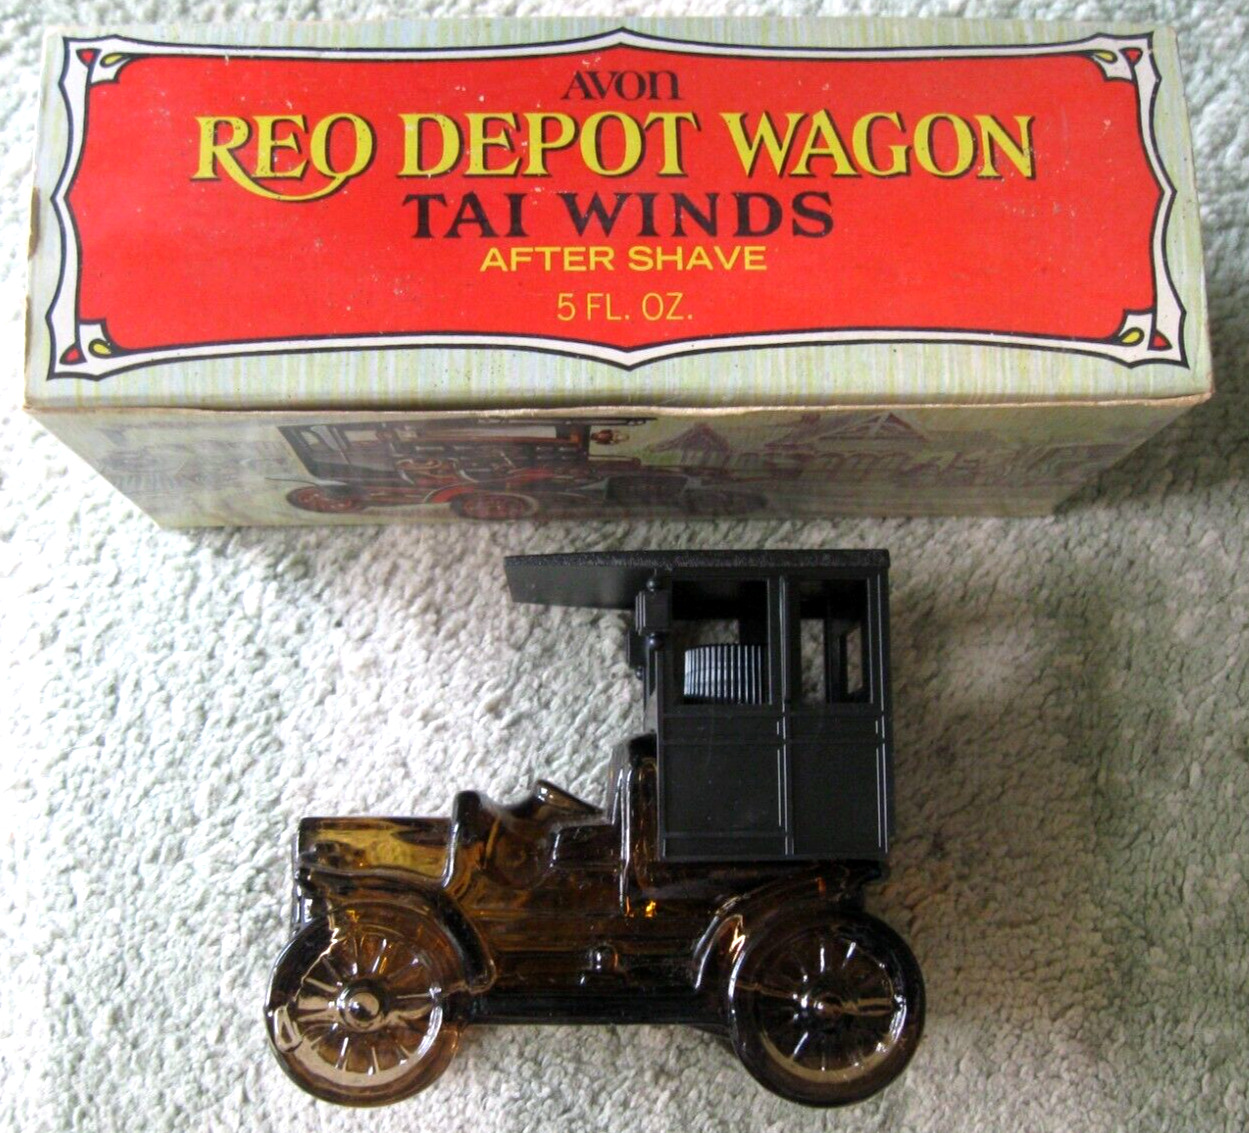 VINTAGE AVON 1906 REO DEPOT WAGON TAI WINDS AFTER SHAVE 5 FL OZ New Full Unused